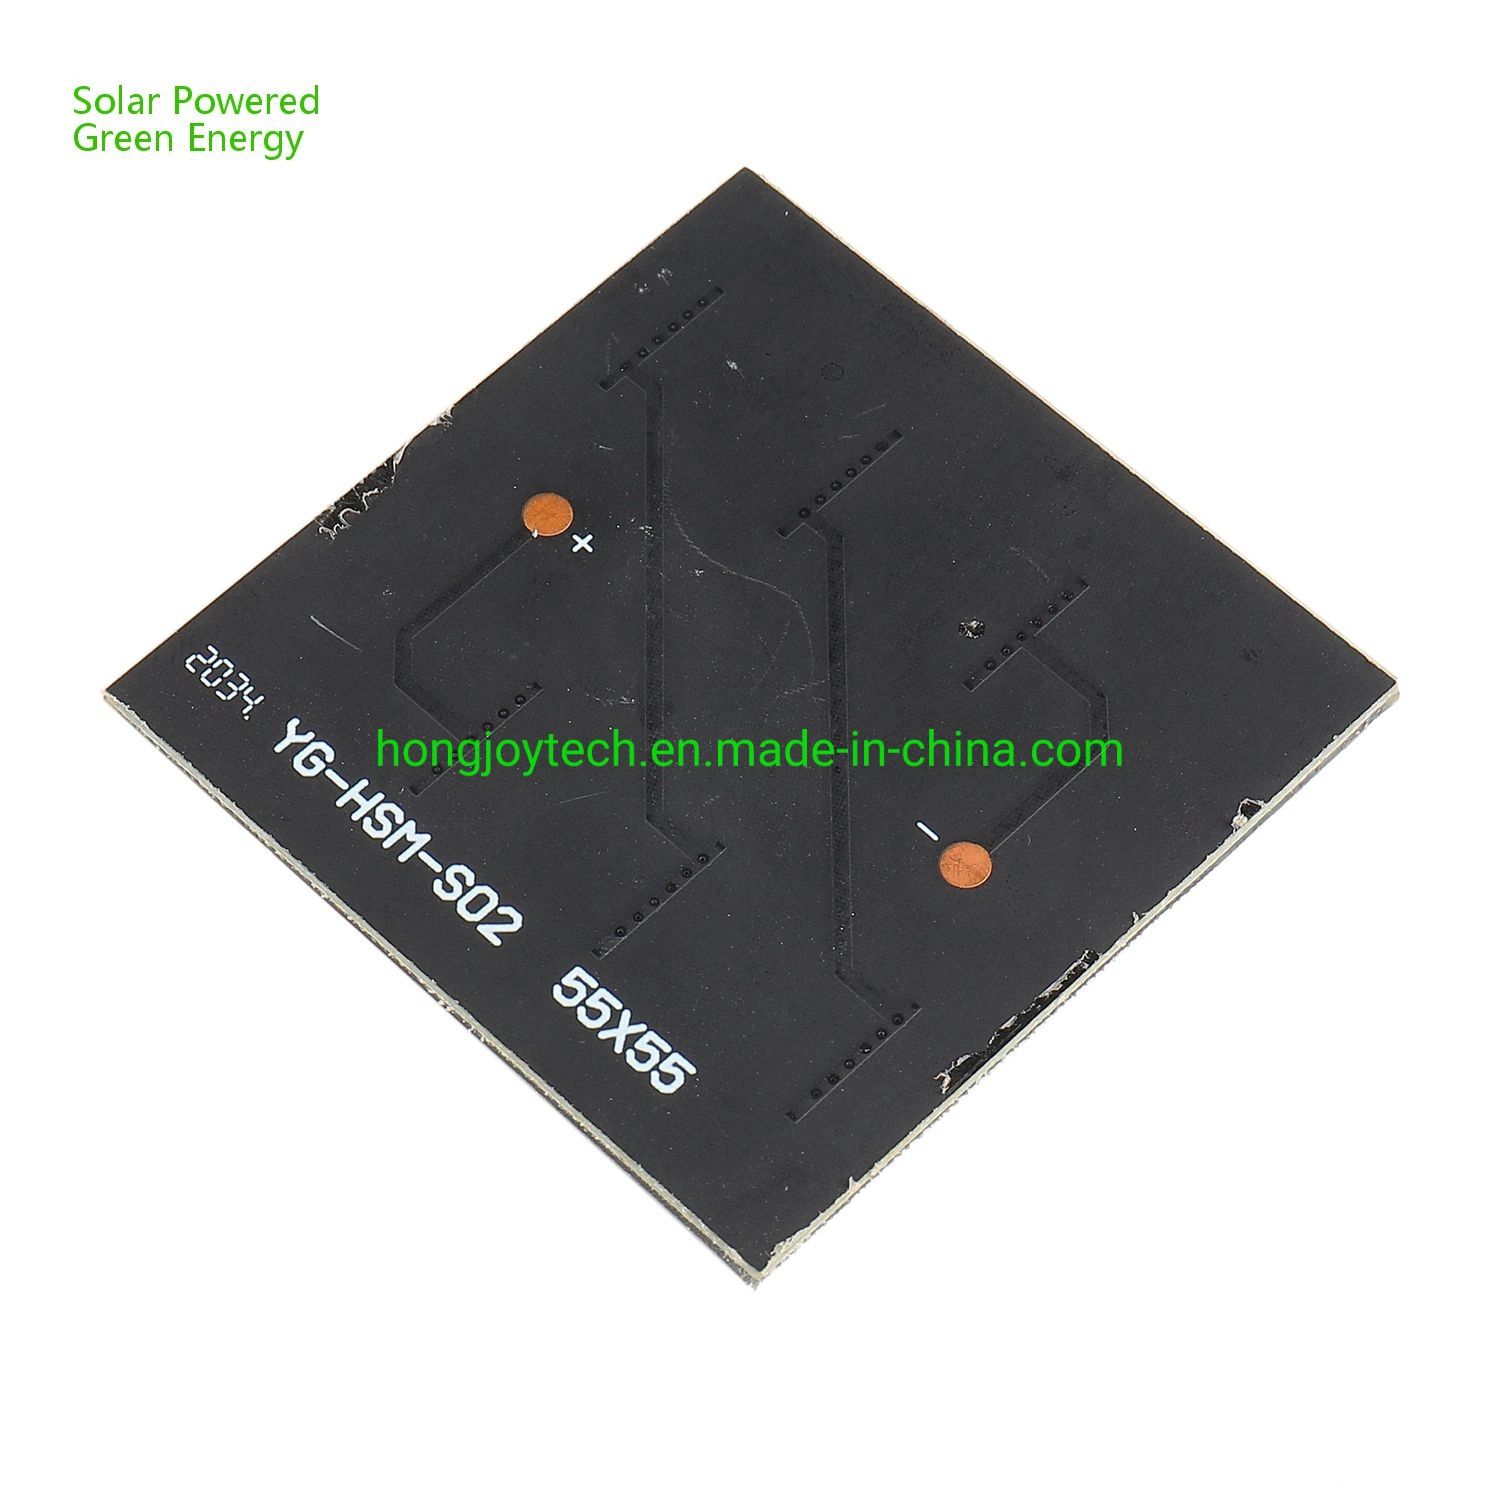 Sharing Bike Monitor Electric Scale and Toy etc. 1W 2W 3W 4W 5W 6W 7W 8W 9W 10W 12V Any Shape Customized SMT Sunpower ETFE Mono Cell Mini Solar PV Module Panel